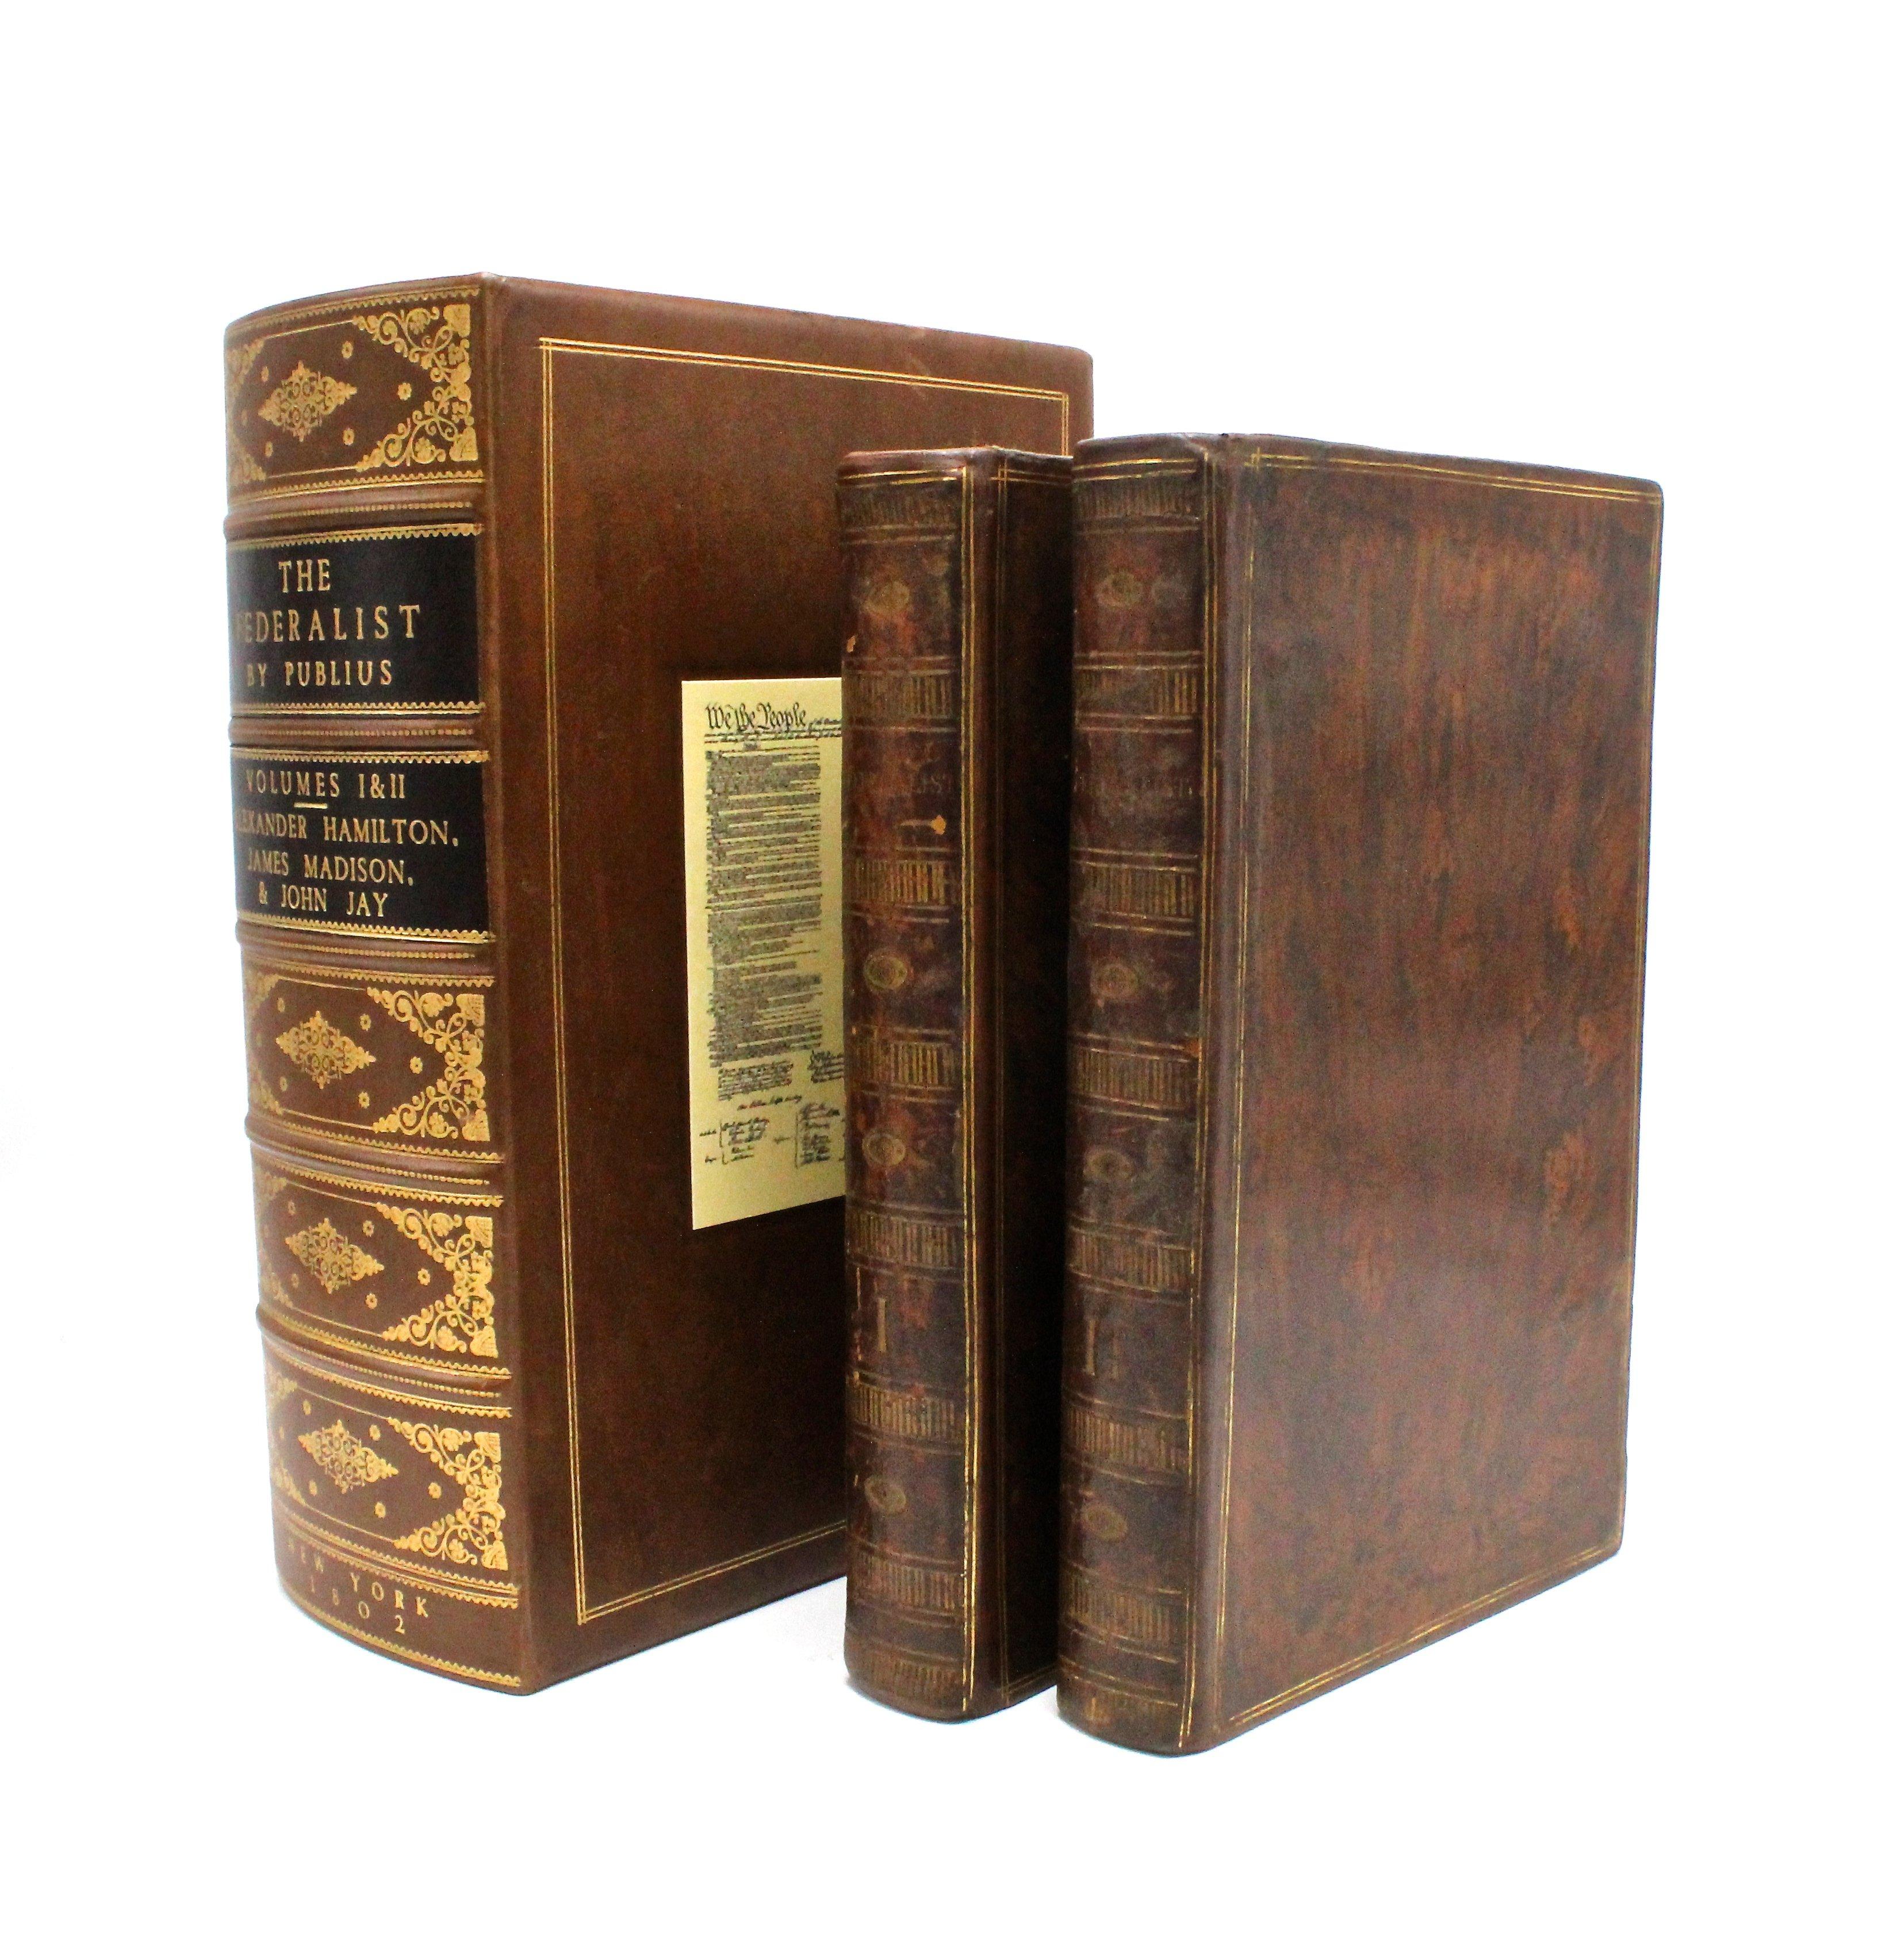 By Alexander Hamilton, James Madison, and John Jay. 
Printed and sold by George F. Hopkins, New York, 1802

Rare second edition of the most important work of American political thought ever written and according to Thomas Jefferson 